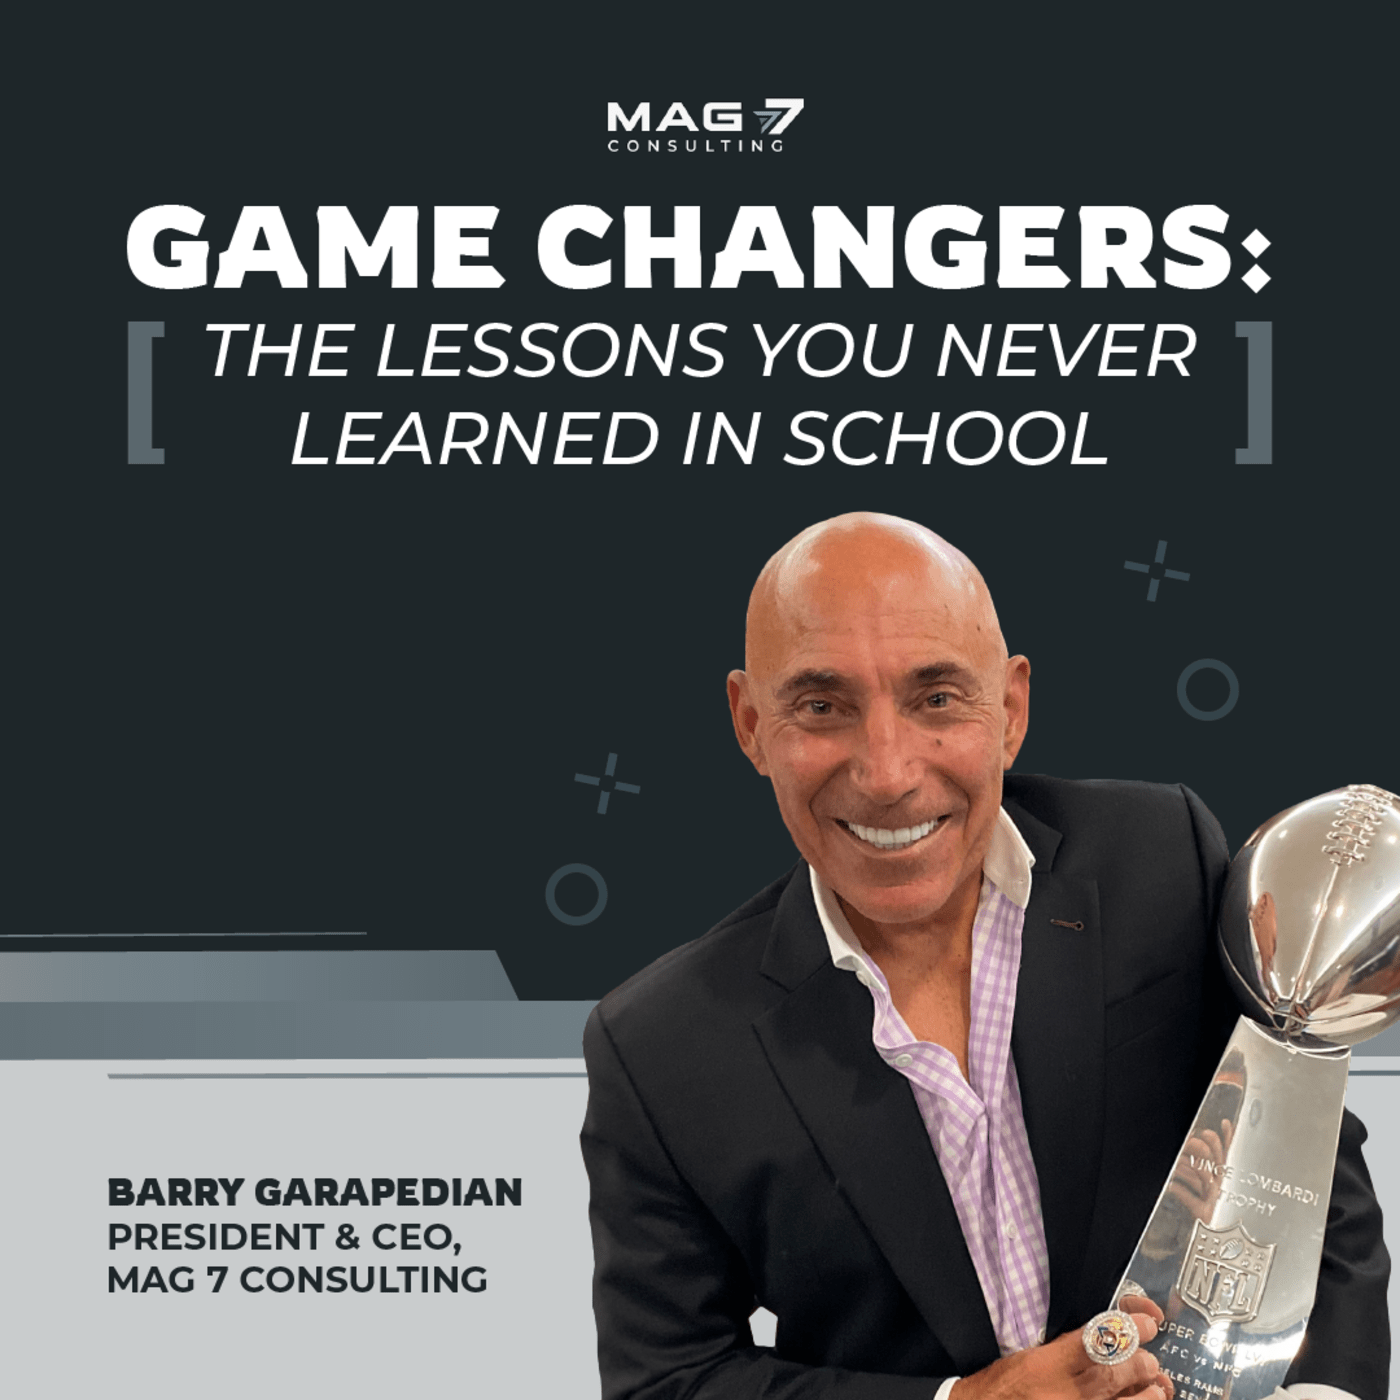 Game Changers: The Lessons You Never Learned in School